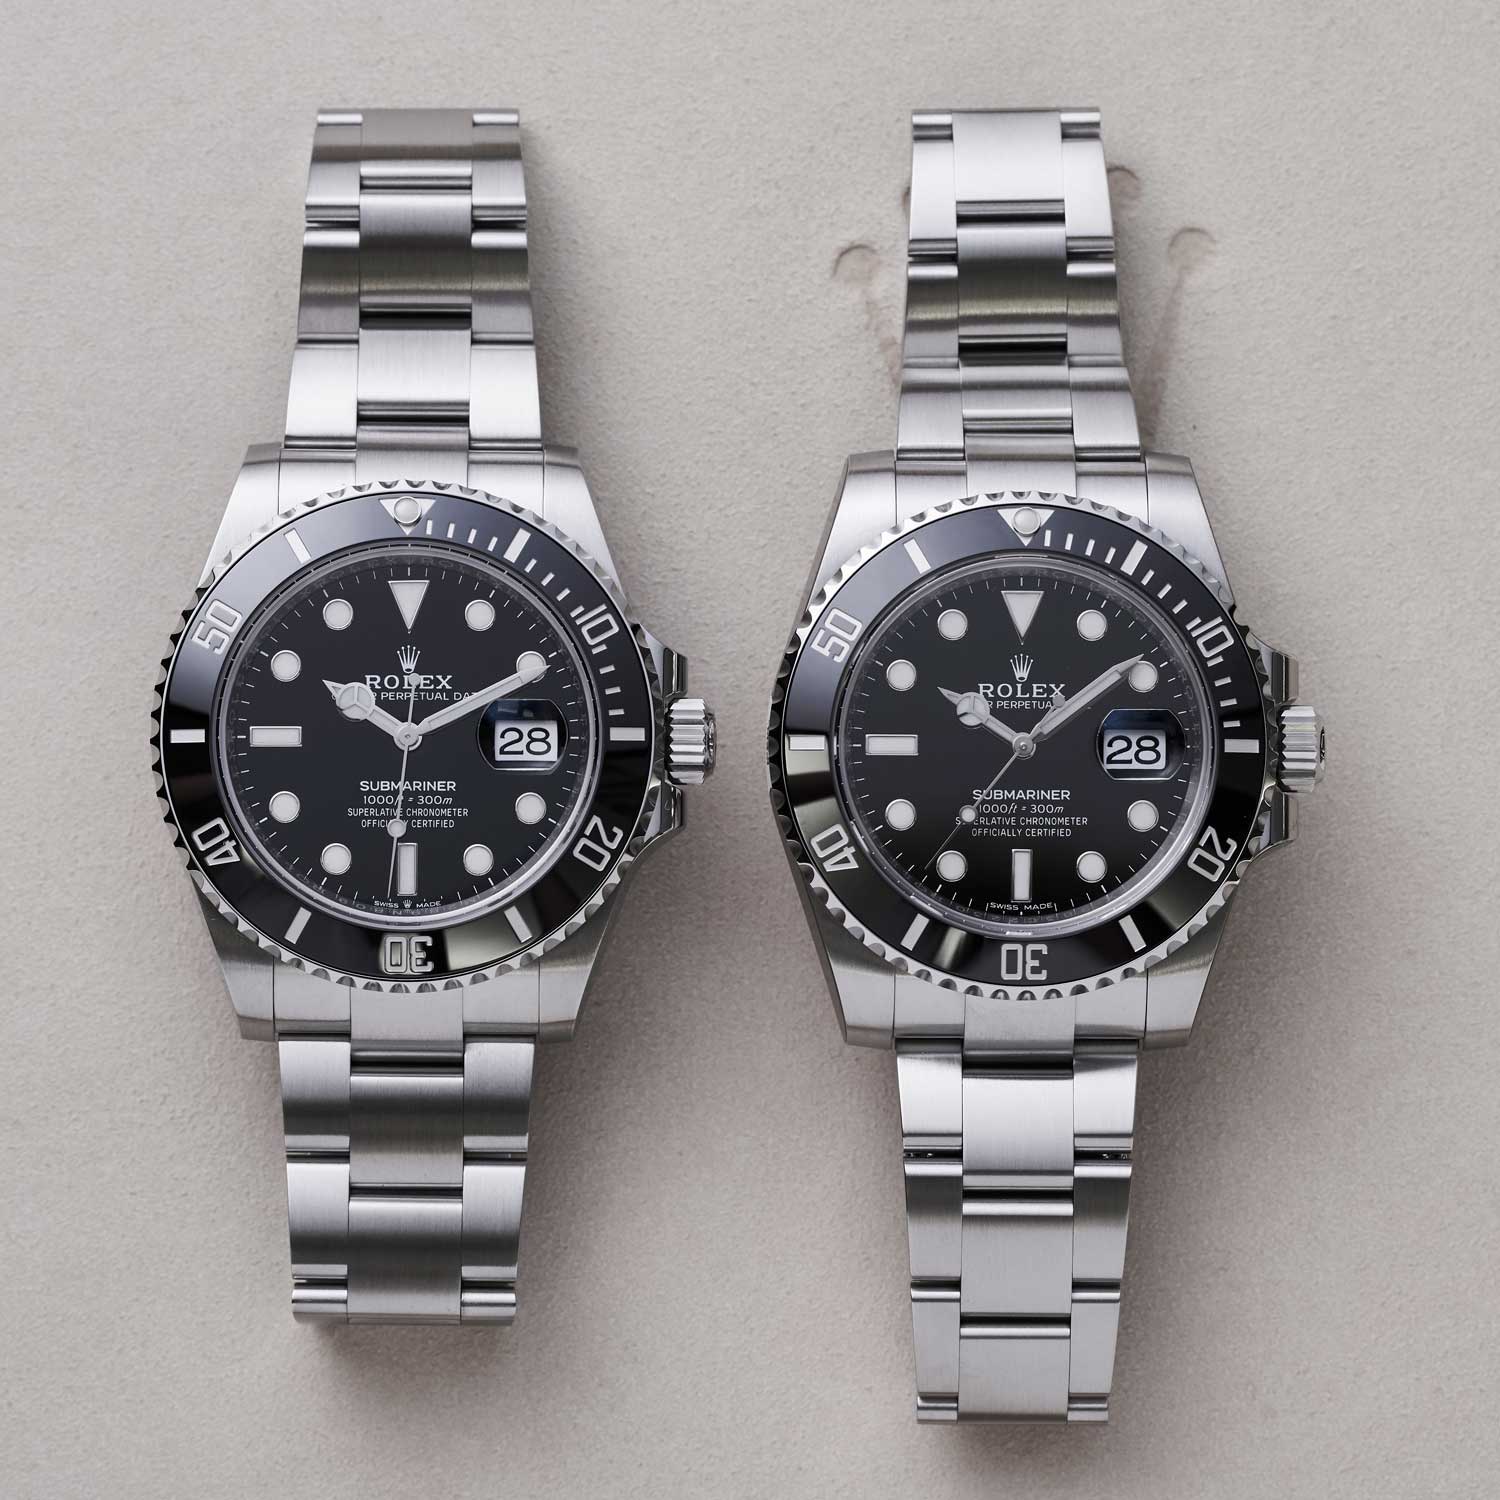 A side by side comparison of the 2020 ref. 126610 with the outgoing 2010 ref.116610 both in Oystersteel; at 41mm the new Submariner case represents a marginal increase in size from its predecessors 40 mm in diameter and is still a full 2mm smaller than the 43mm diameter of its deep saturation dive sibling the Sea-Dweller. (©Revolution)